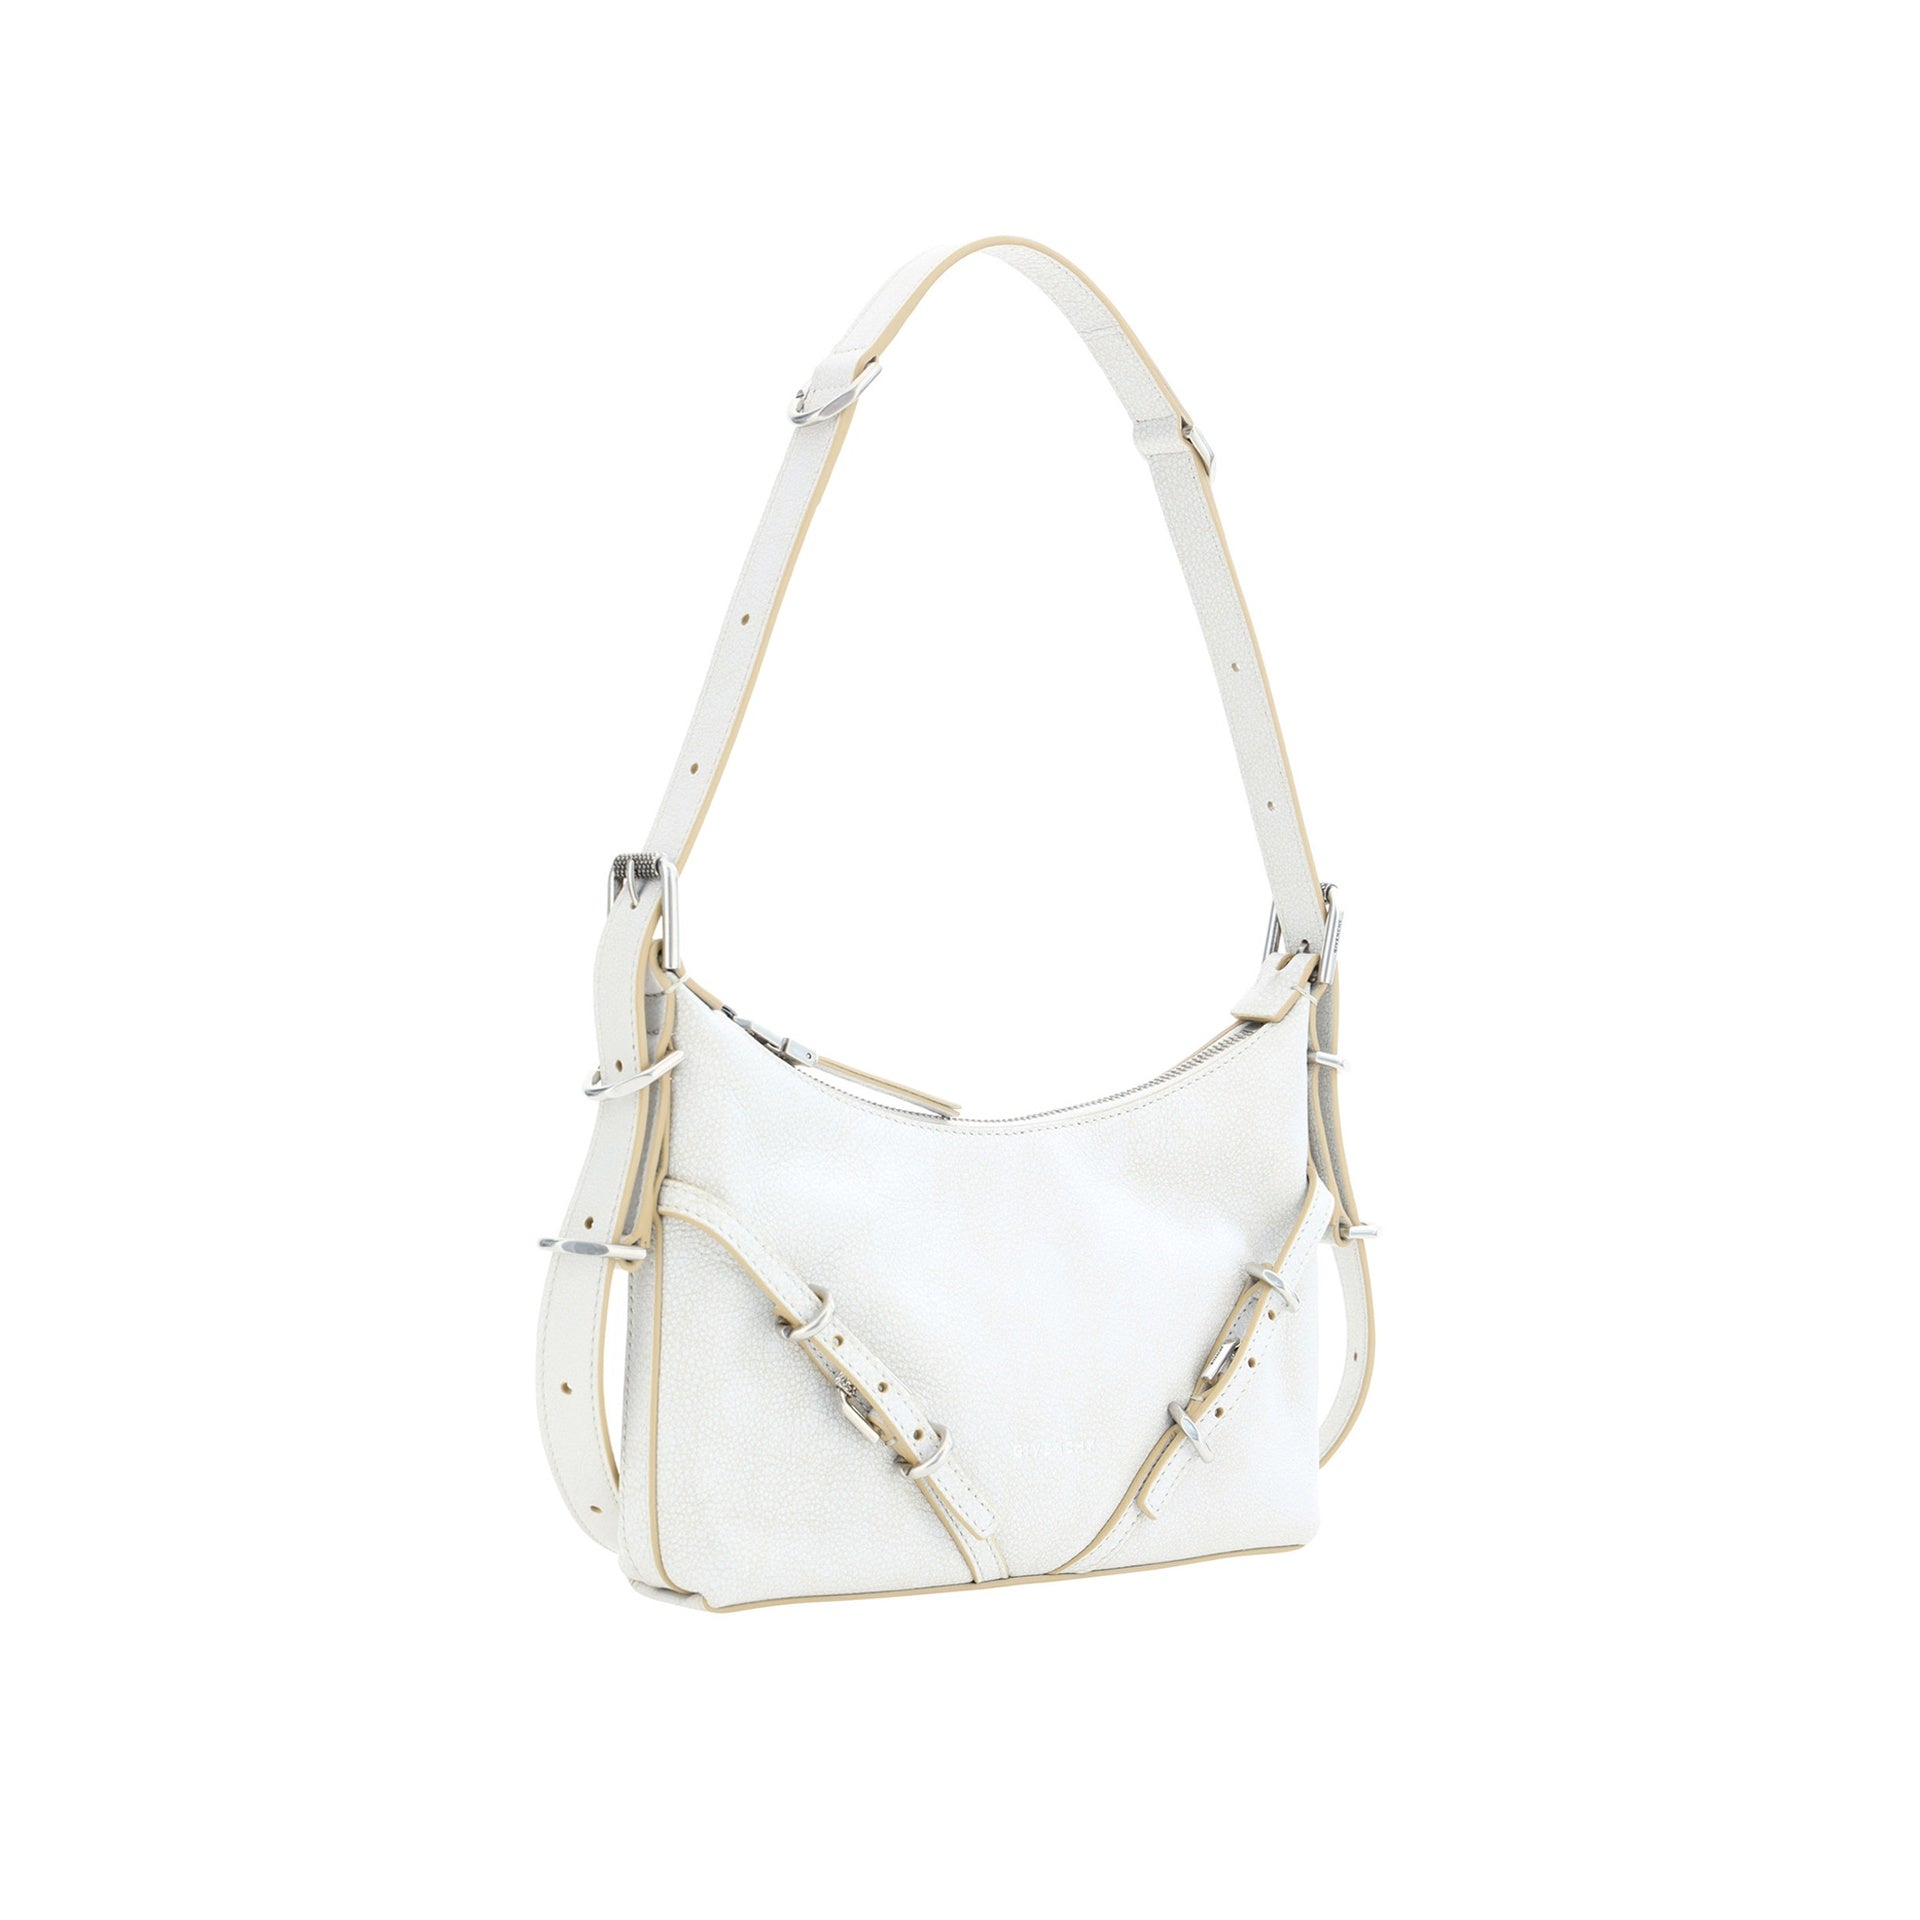 GIVENCHY-OUTLET-SALE-Versace-Voyou-Mini-Bag-Taschen-WHITE-UNI-ARCHIVE-COLLECTION-2.jpg